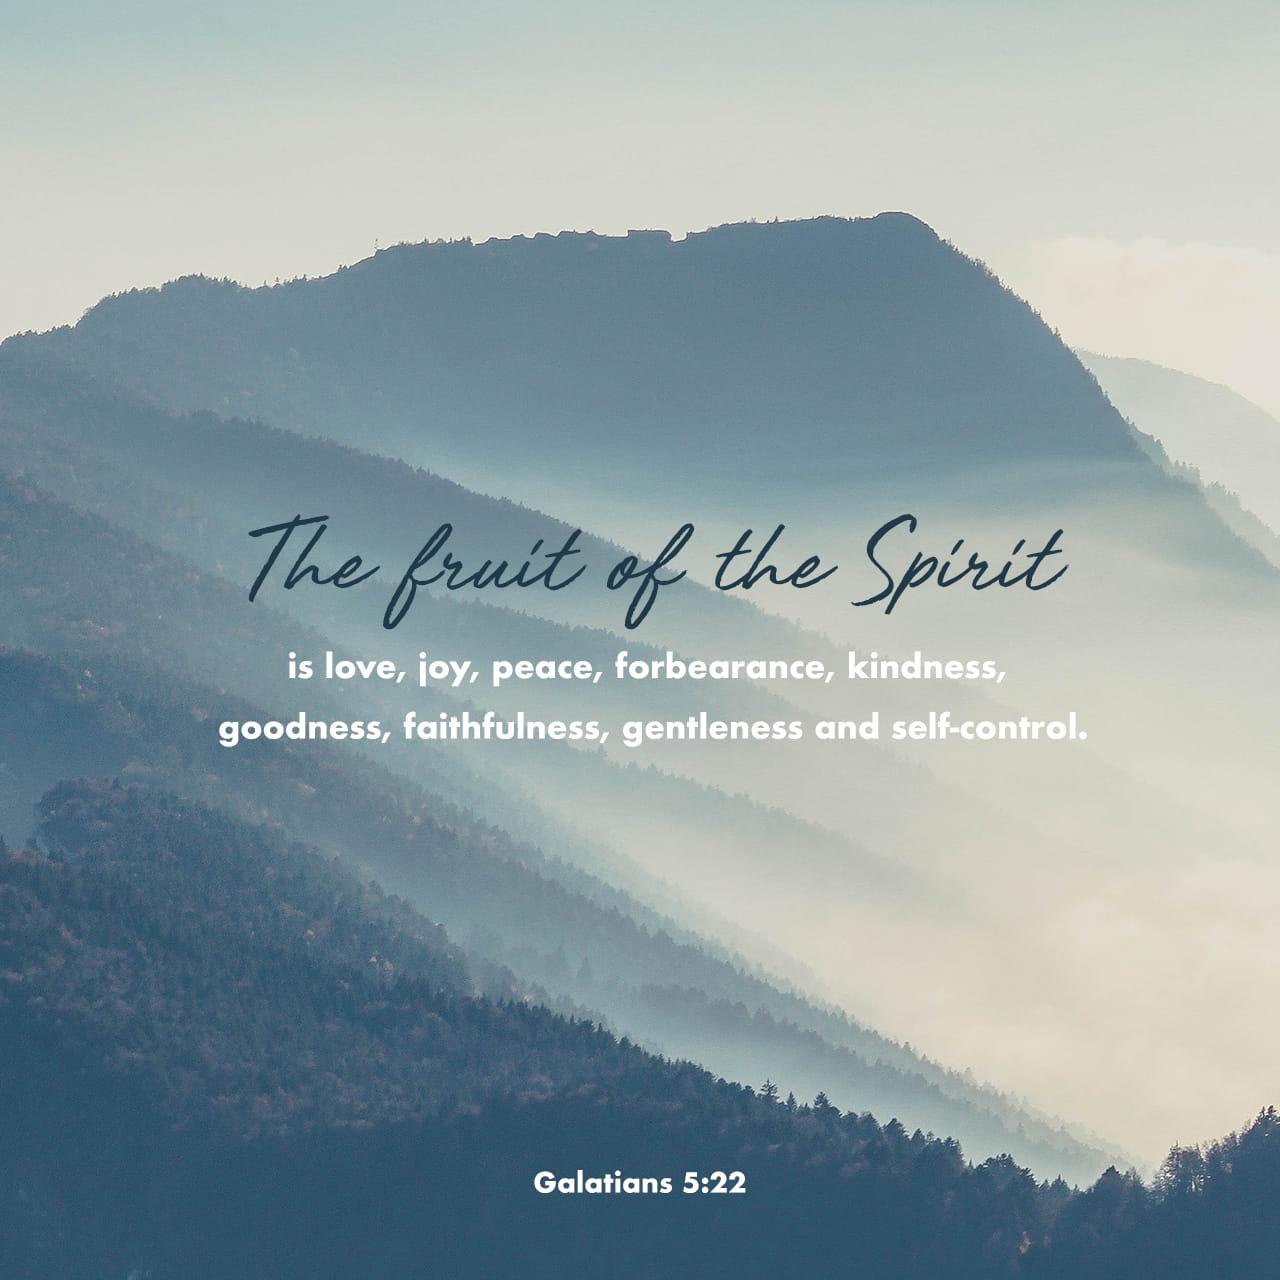 Bible Verse of the Day - day 86 - image 2618 (Galatians 5:22)